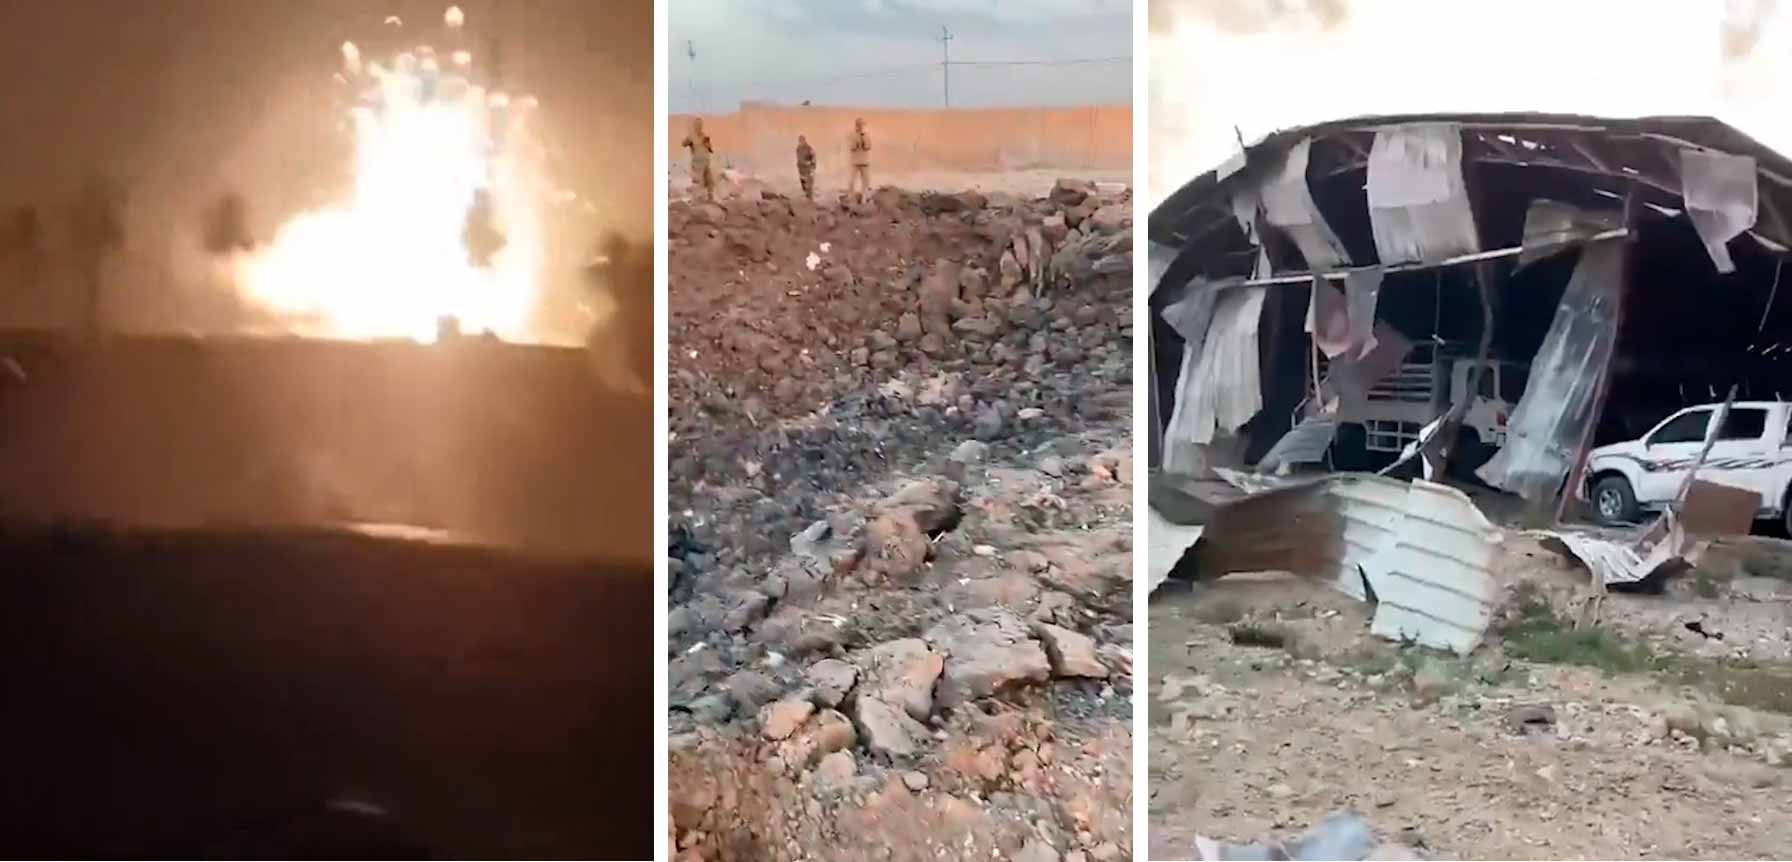 Video: Airstrikes Cause Devastation at Popular Mobilization Forces Base in Iraq. Photo and video: Twitter @visegrad24